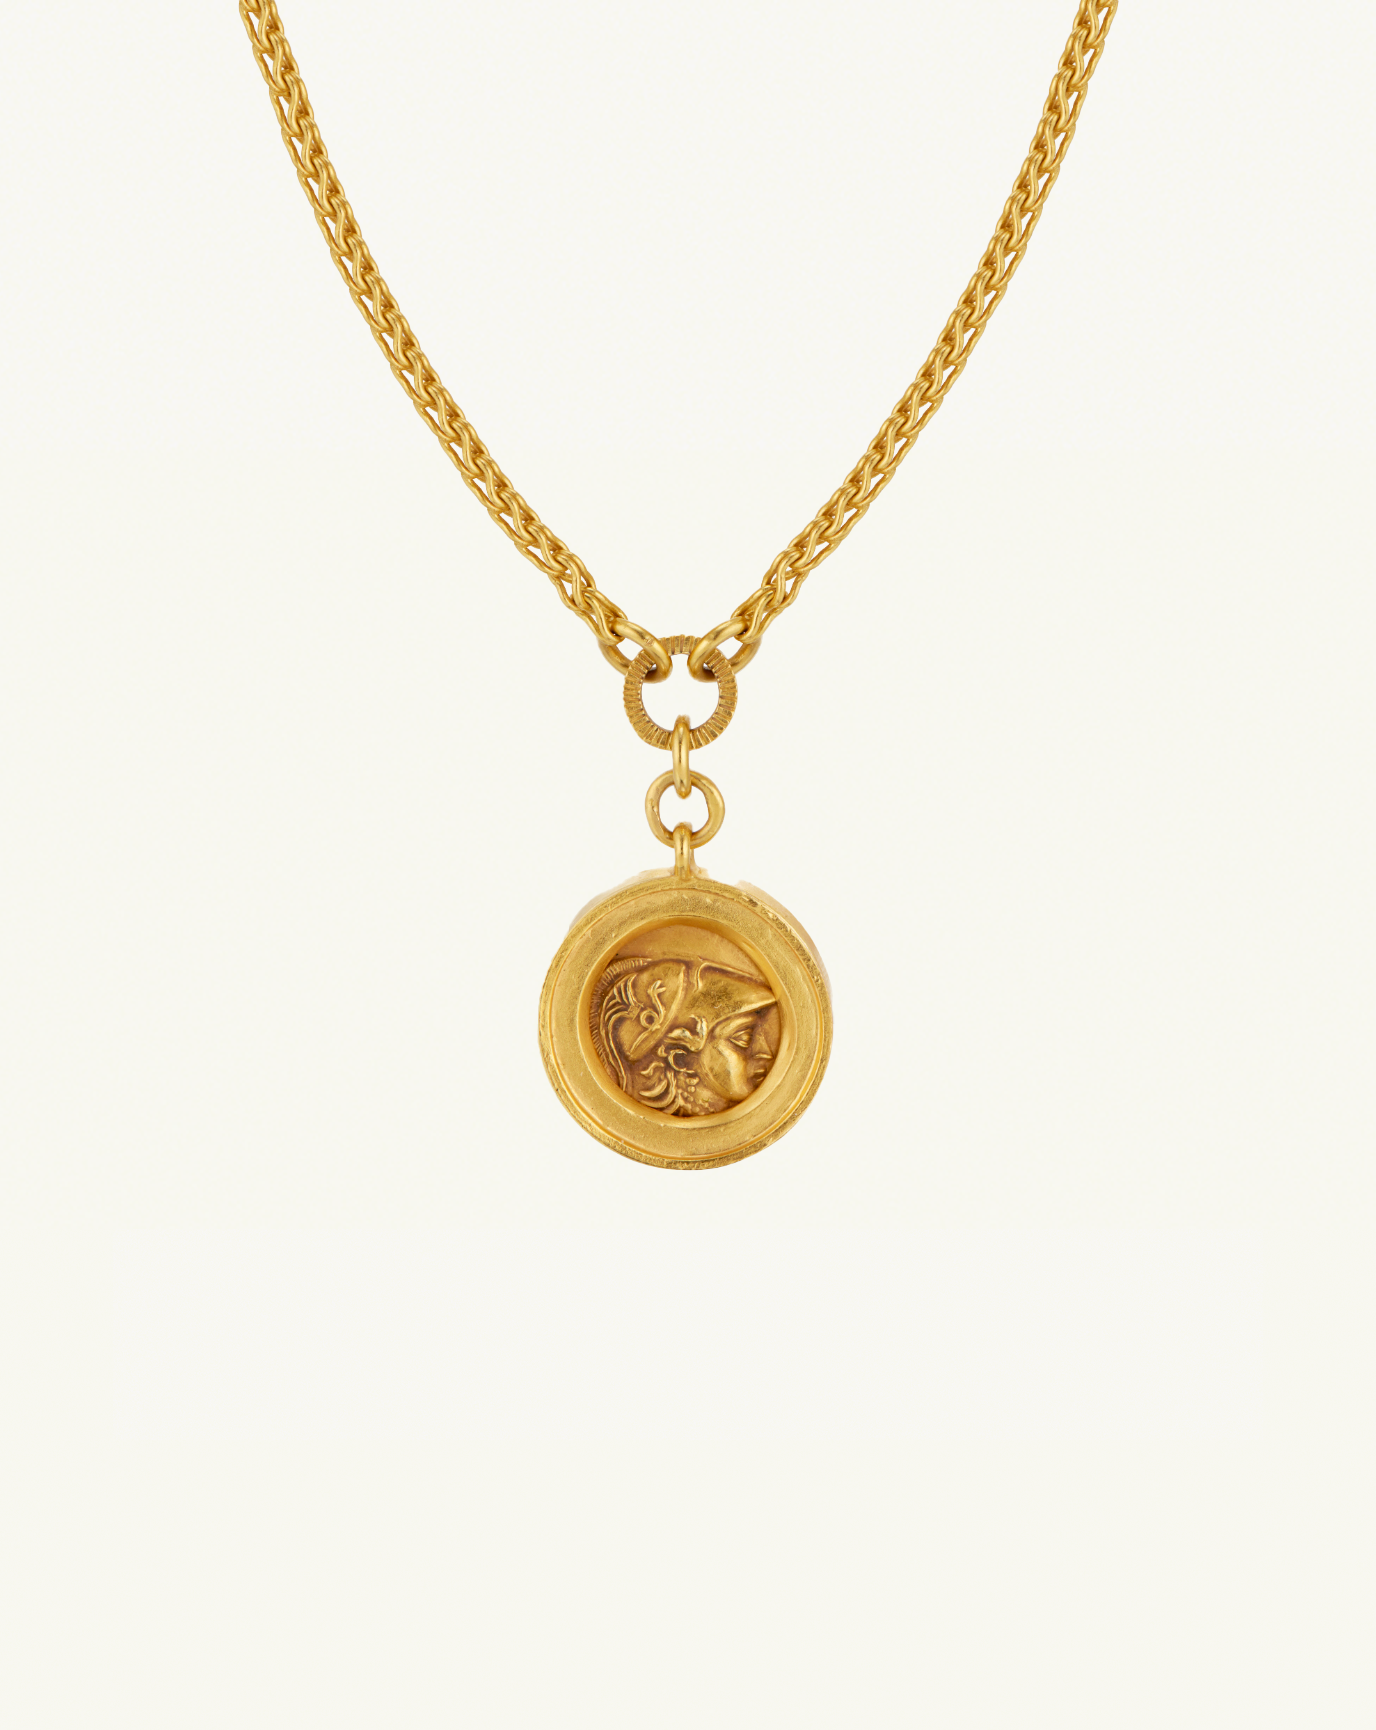 Product image of the gold reversible necklace with pendant and chain